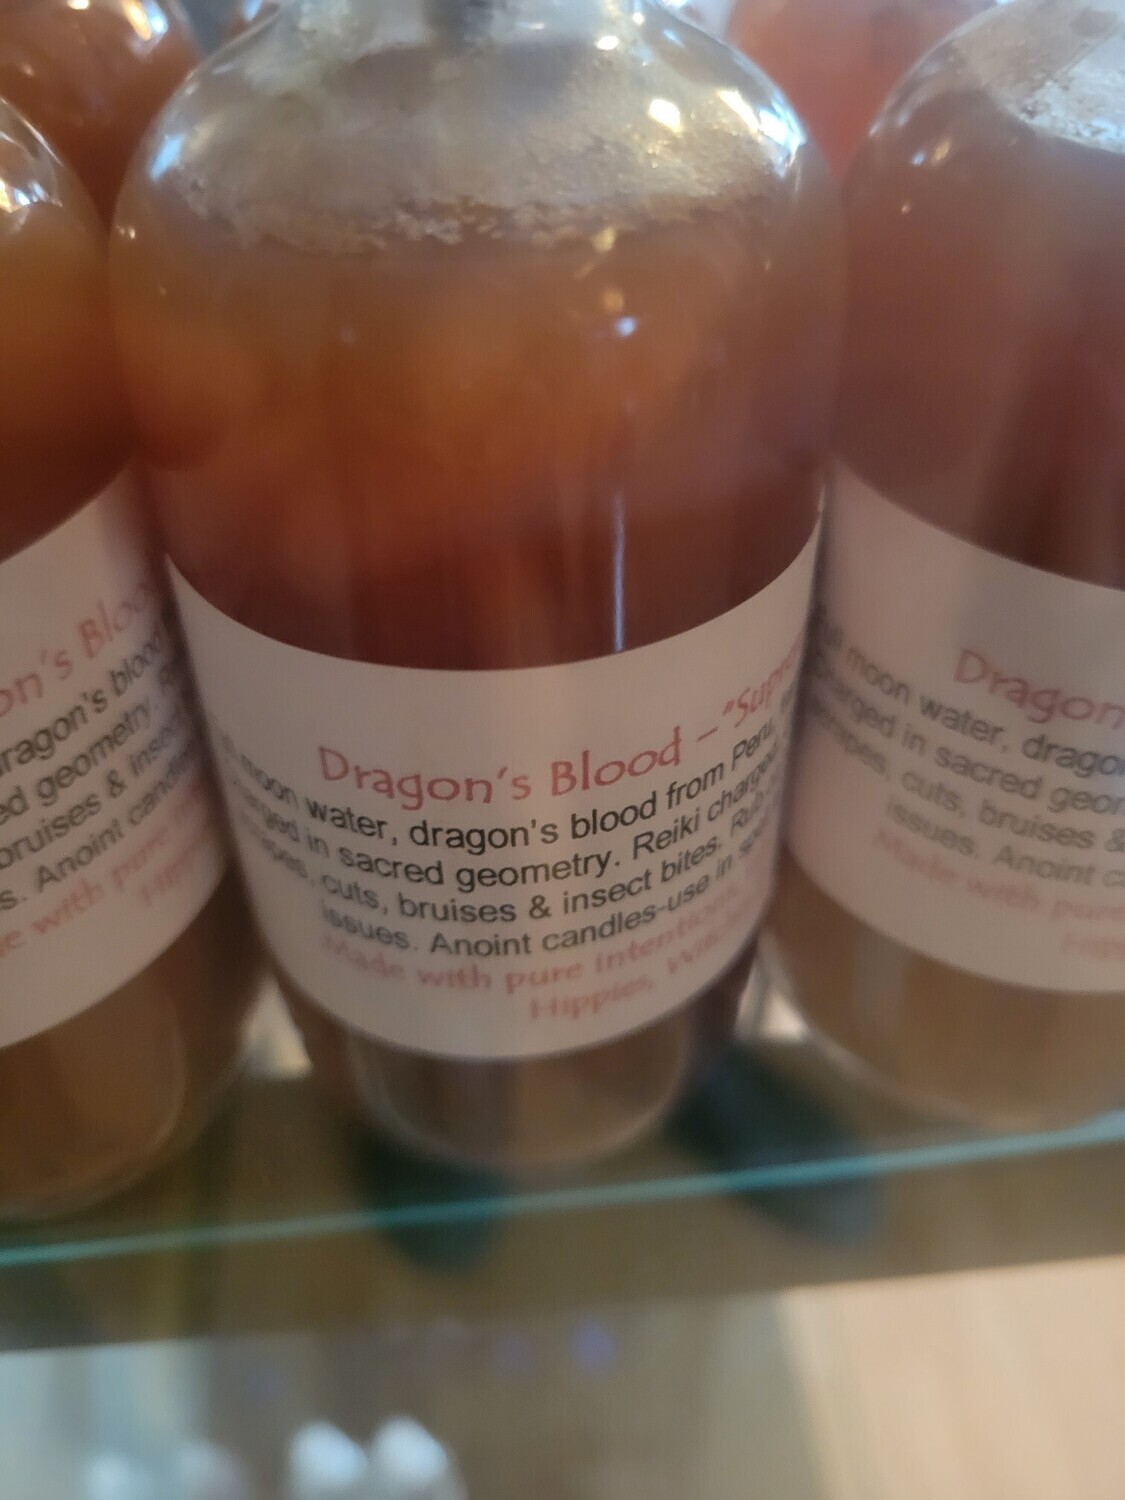 Judy's Moon Water-Dragon's Blood-Supreme -4 oz glass bottle size!! MOST popular in the Dragon's Blood line!